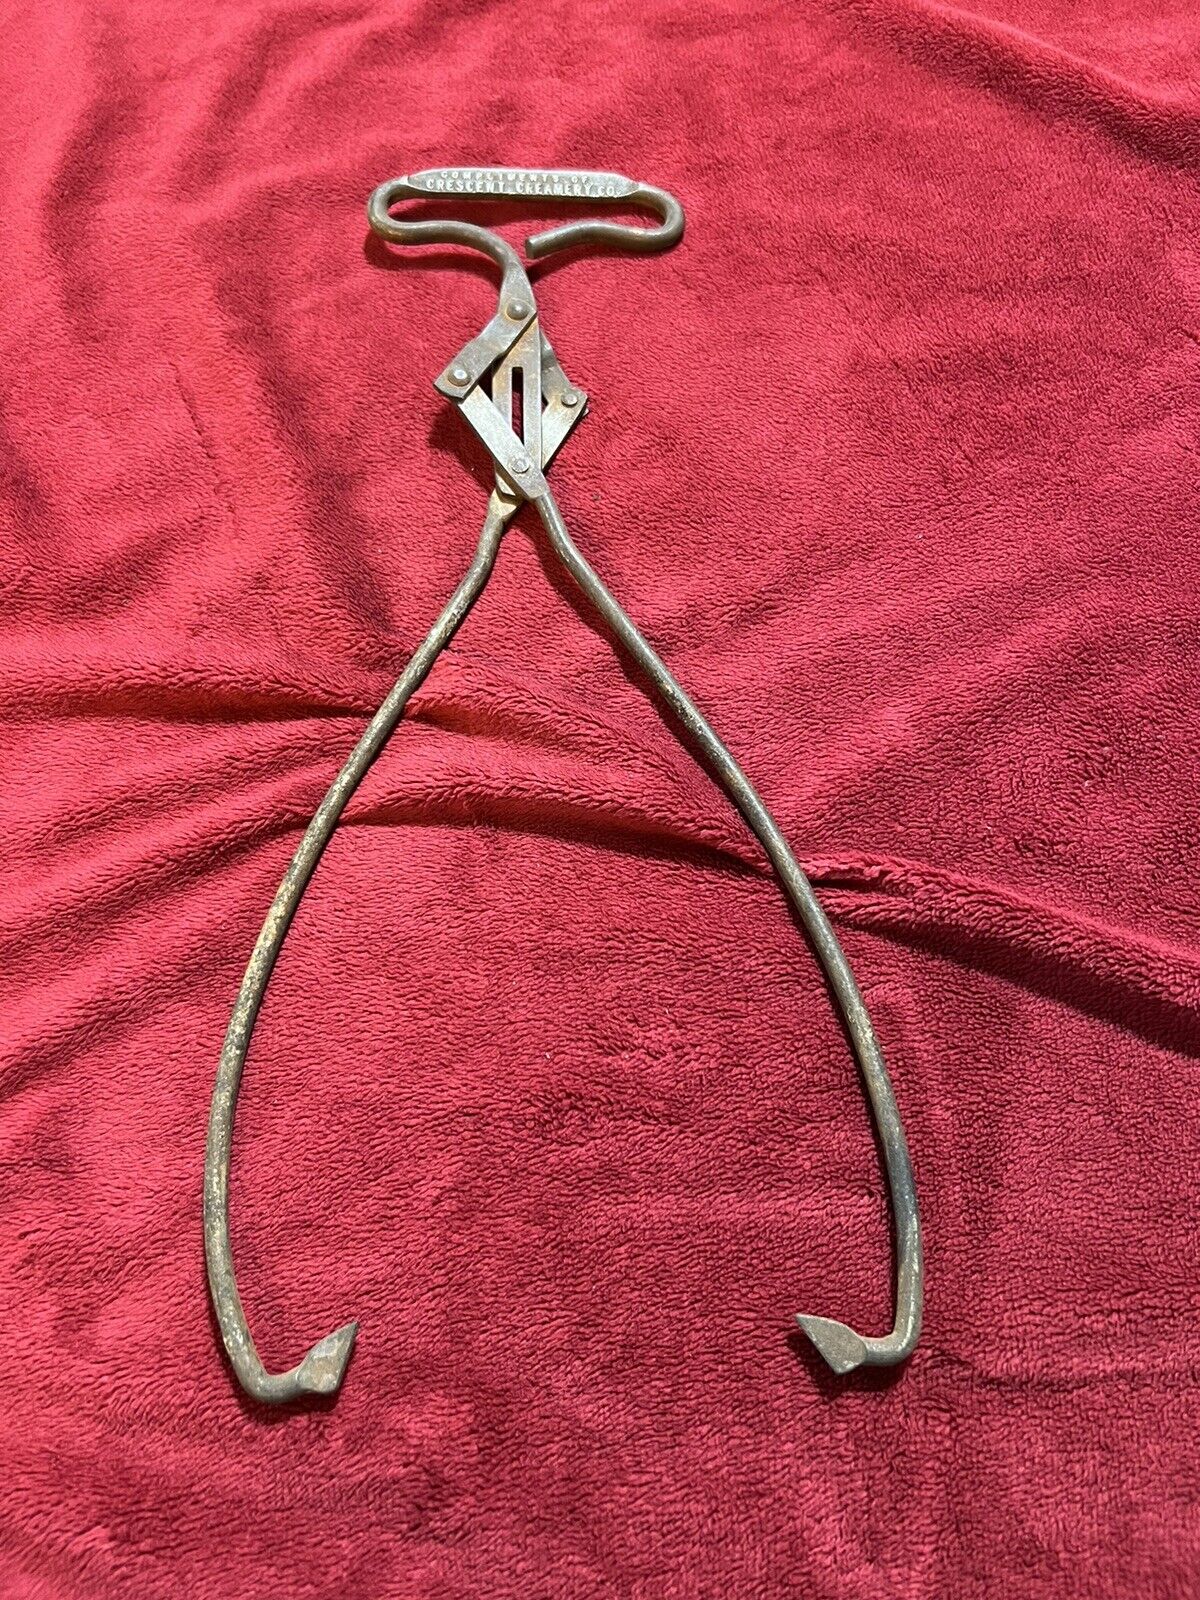 Vintage Single Handle Ice Block Tongs, Crescent Creamery in Sioux Falls, SD.